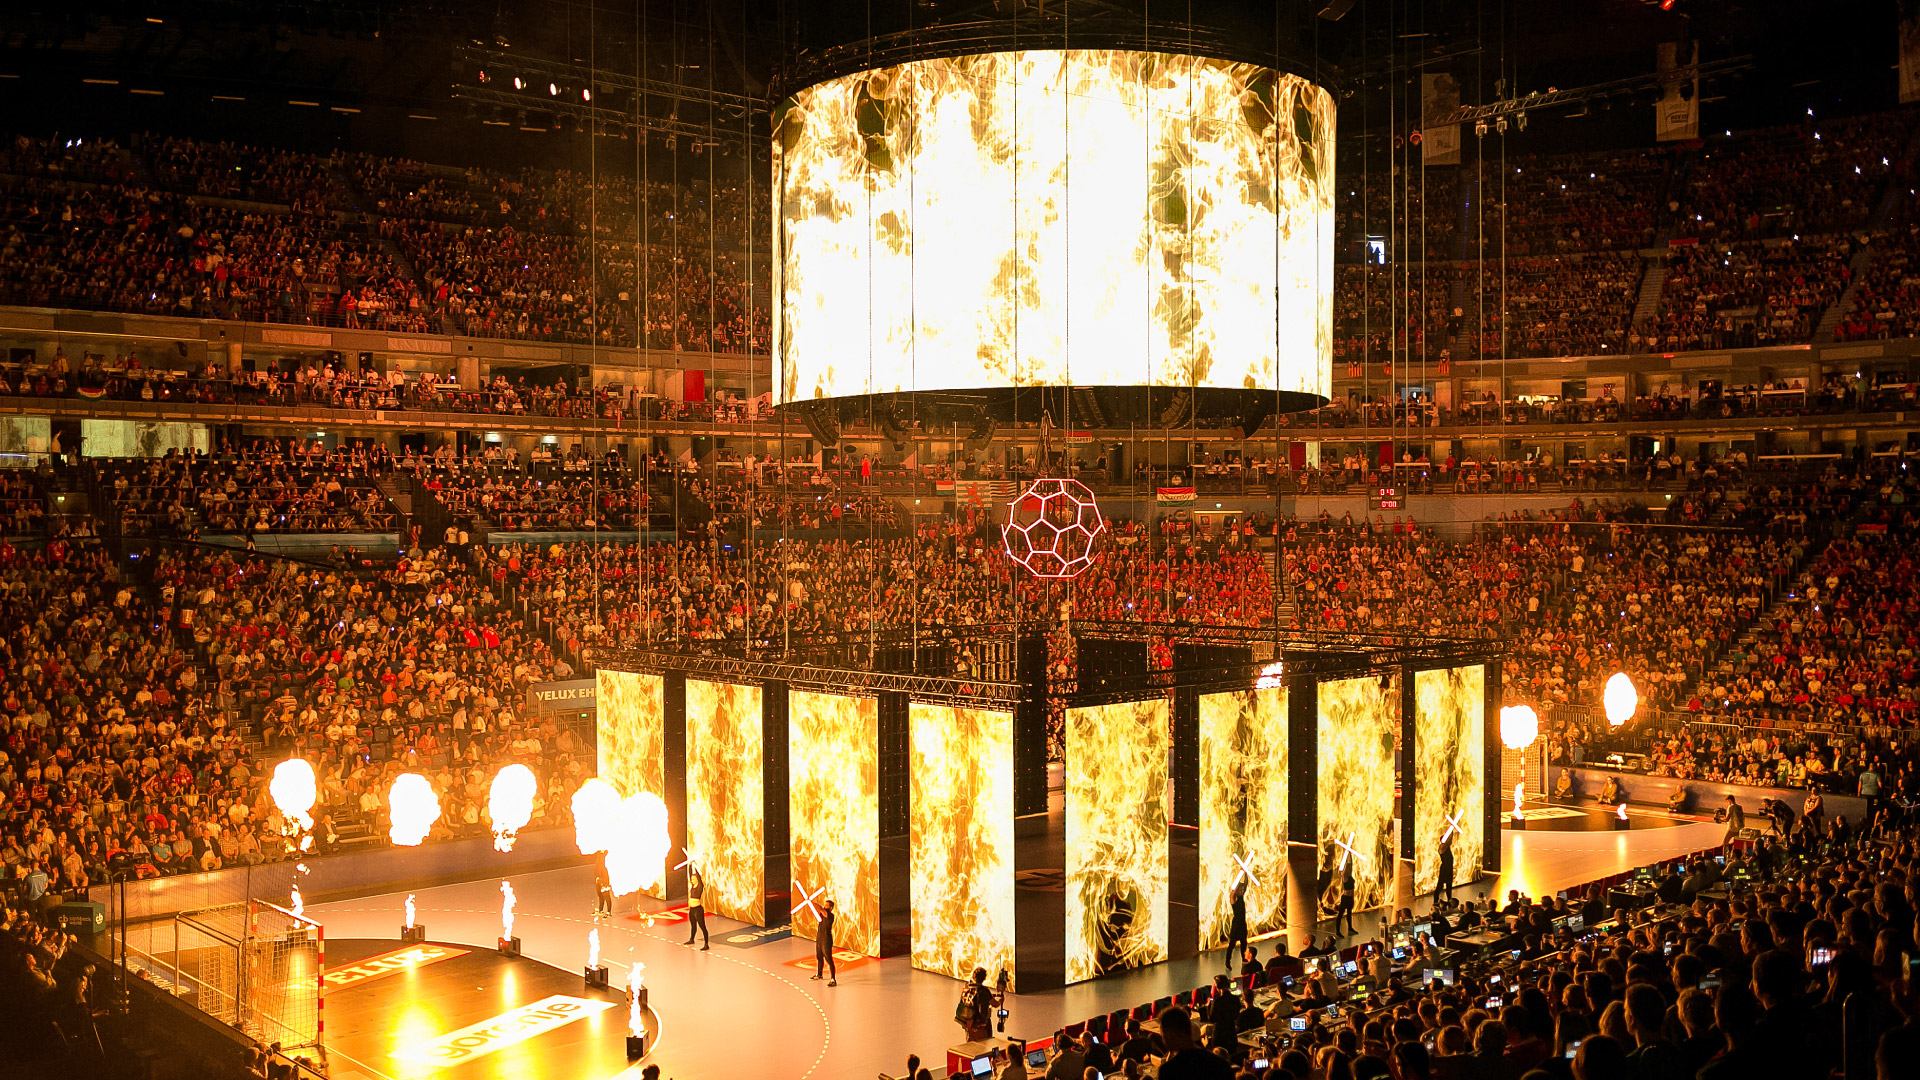 Final of the European Handball Champions League, held in Cologne, Lanxess Arena. PRG delivered the LED-Screens.